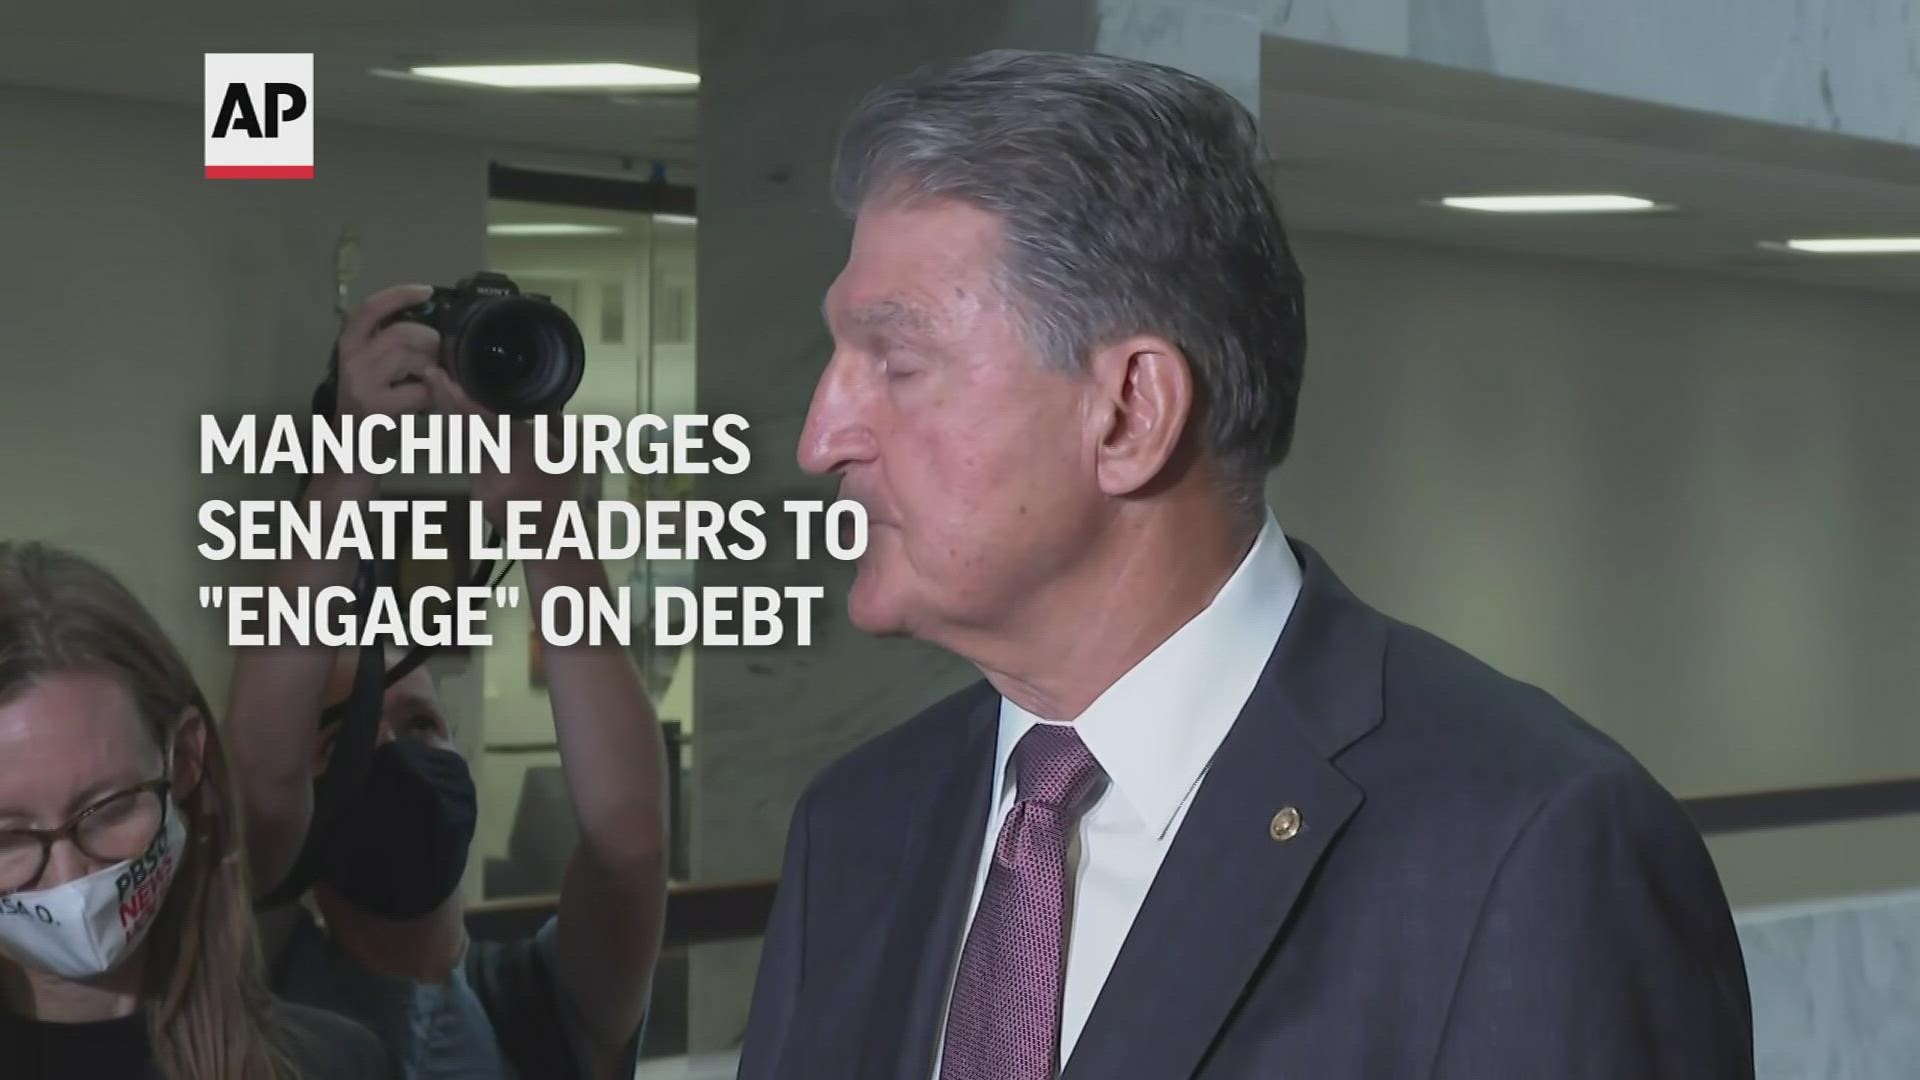 Sen. Joe Manchin implored Senators Chuck Schumer and Mitch McConnell, to "engage" on the debt limit to steer the country away from a default.